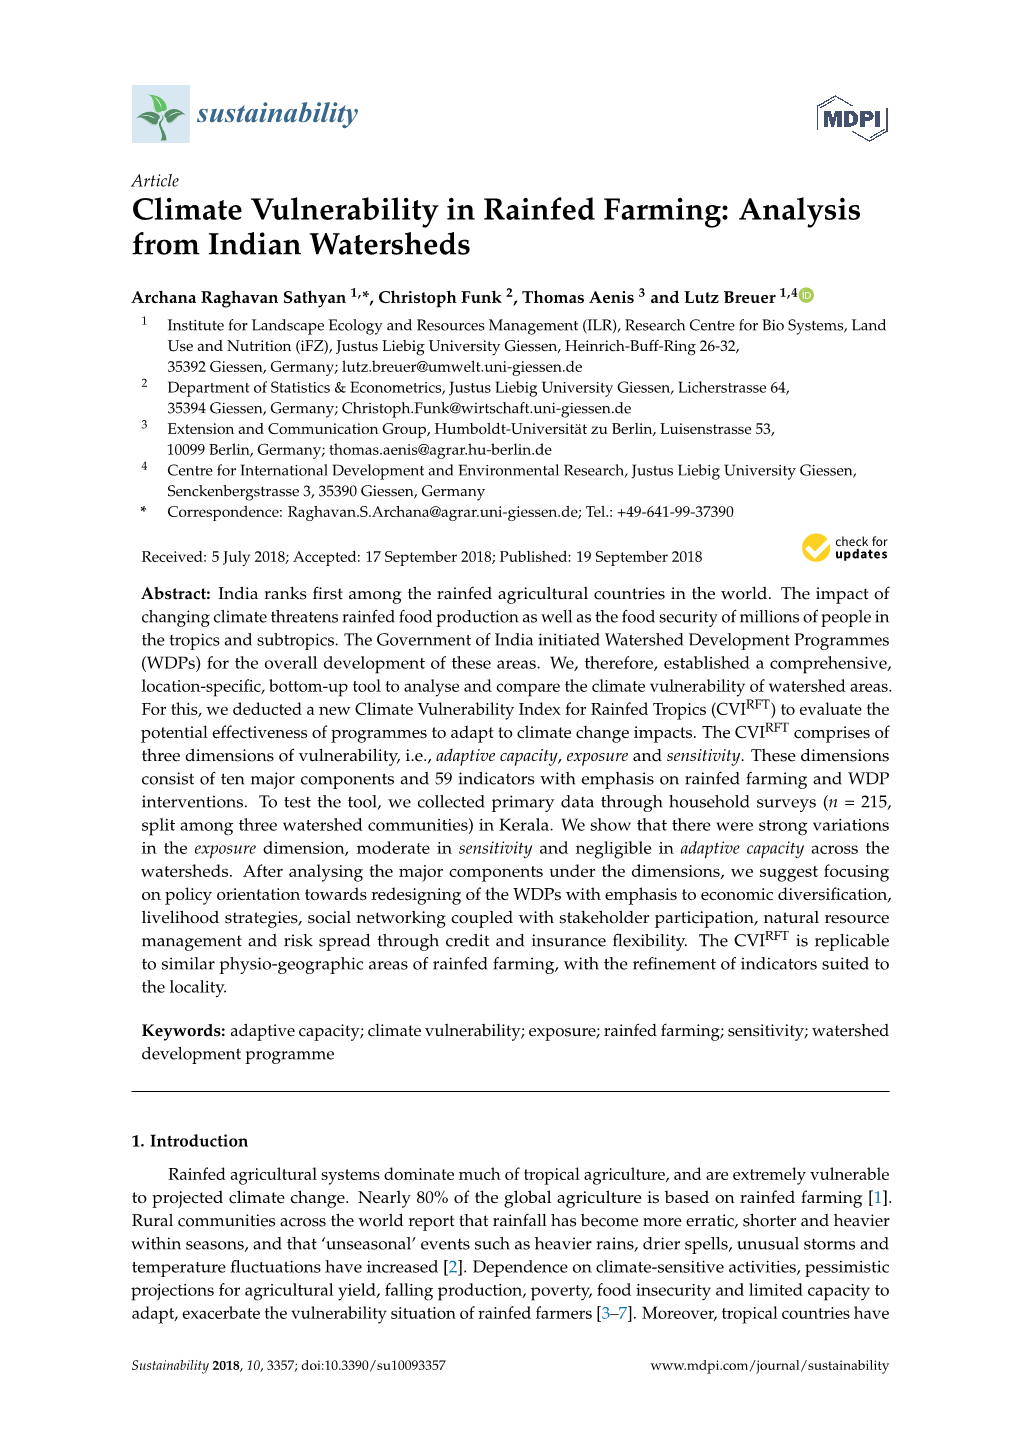 Climate Vulnerability in Rainfed Farming: Analysis from Indian Watersheds